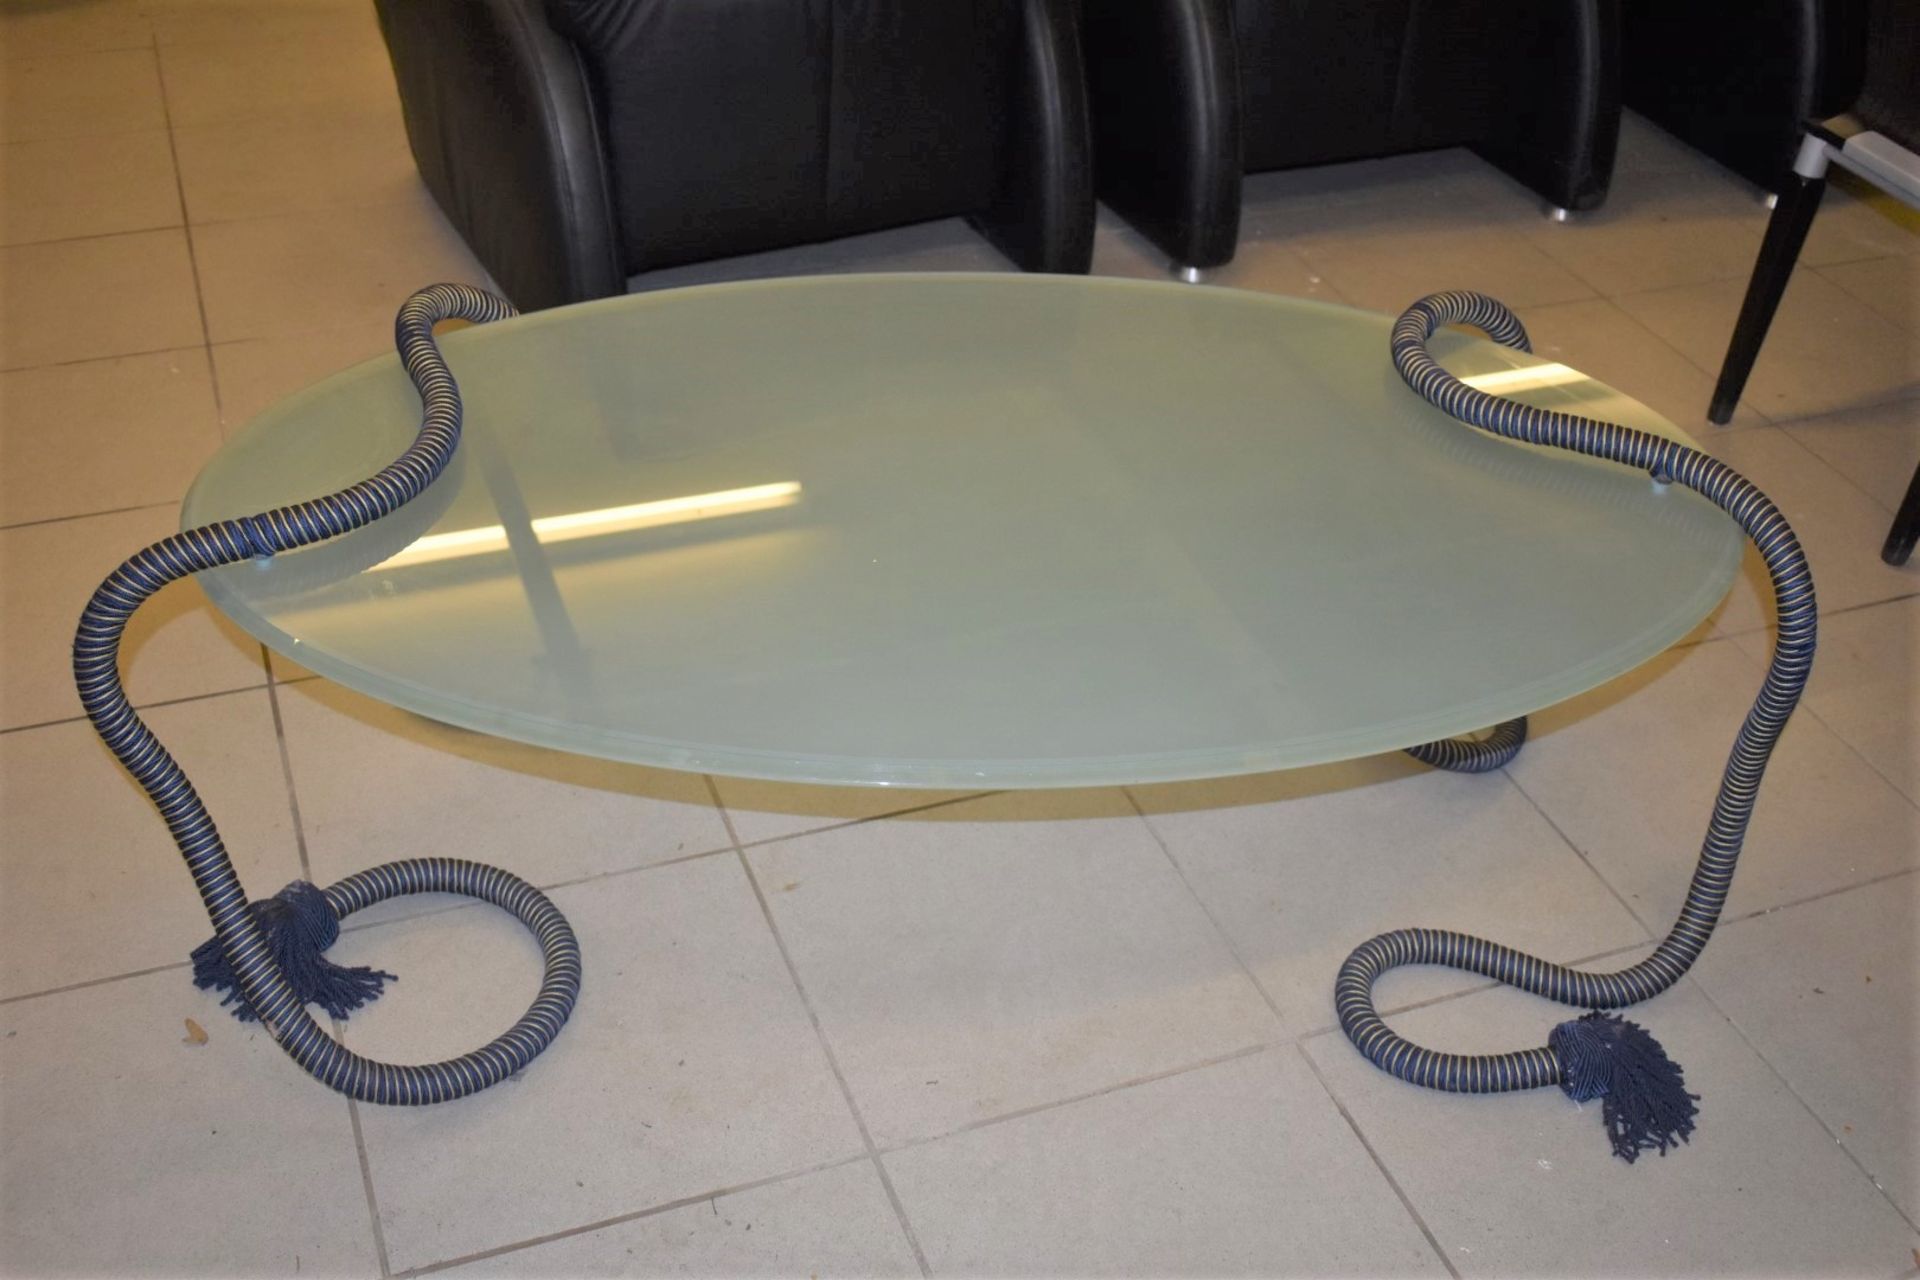 1 x Smoked Glass Coffee Table - Elevated Design With Rope Legs - To Be Removed From an Exclusive - Image 2 of 5